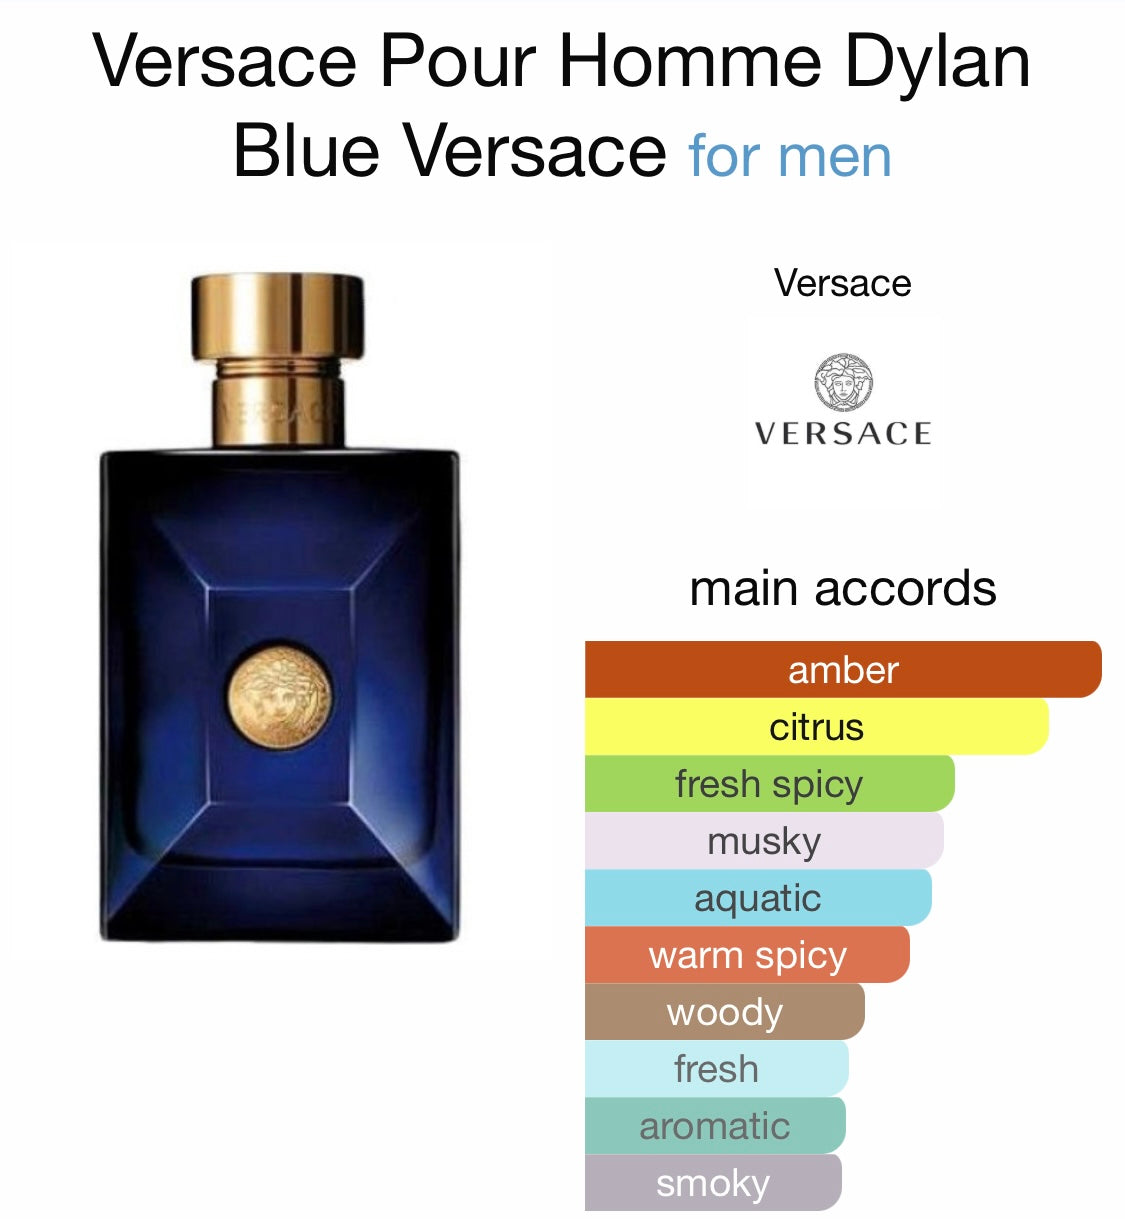 BEFORE YOU BUY Versace Dylan Blue